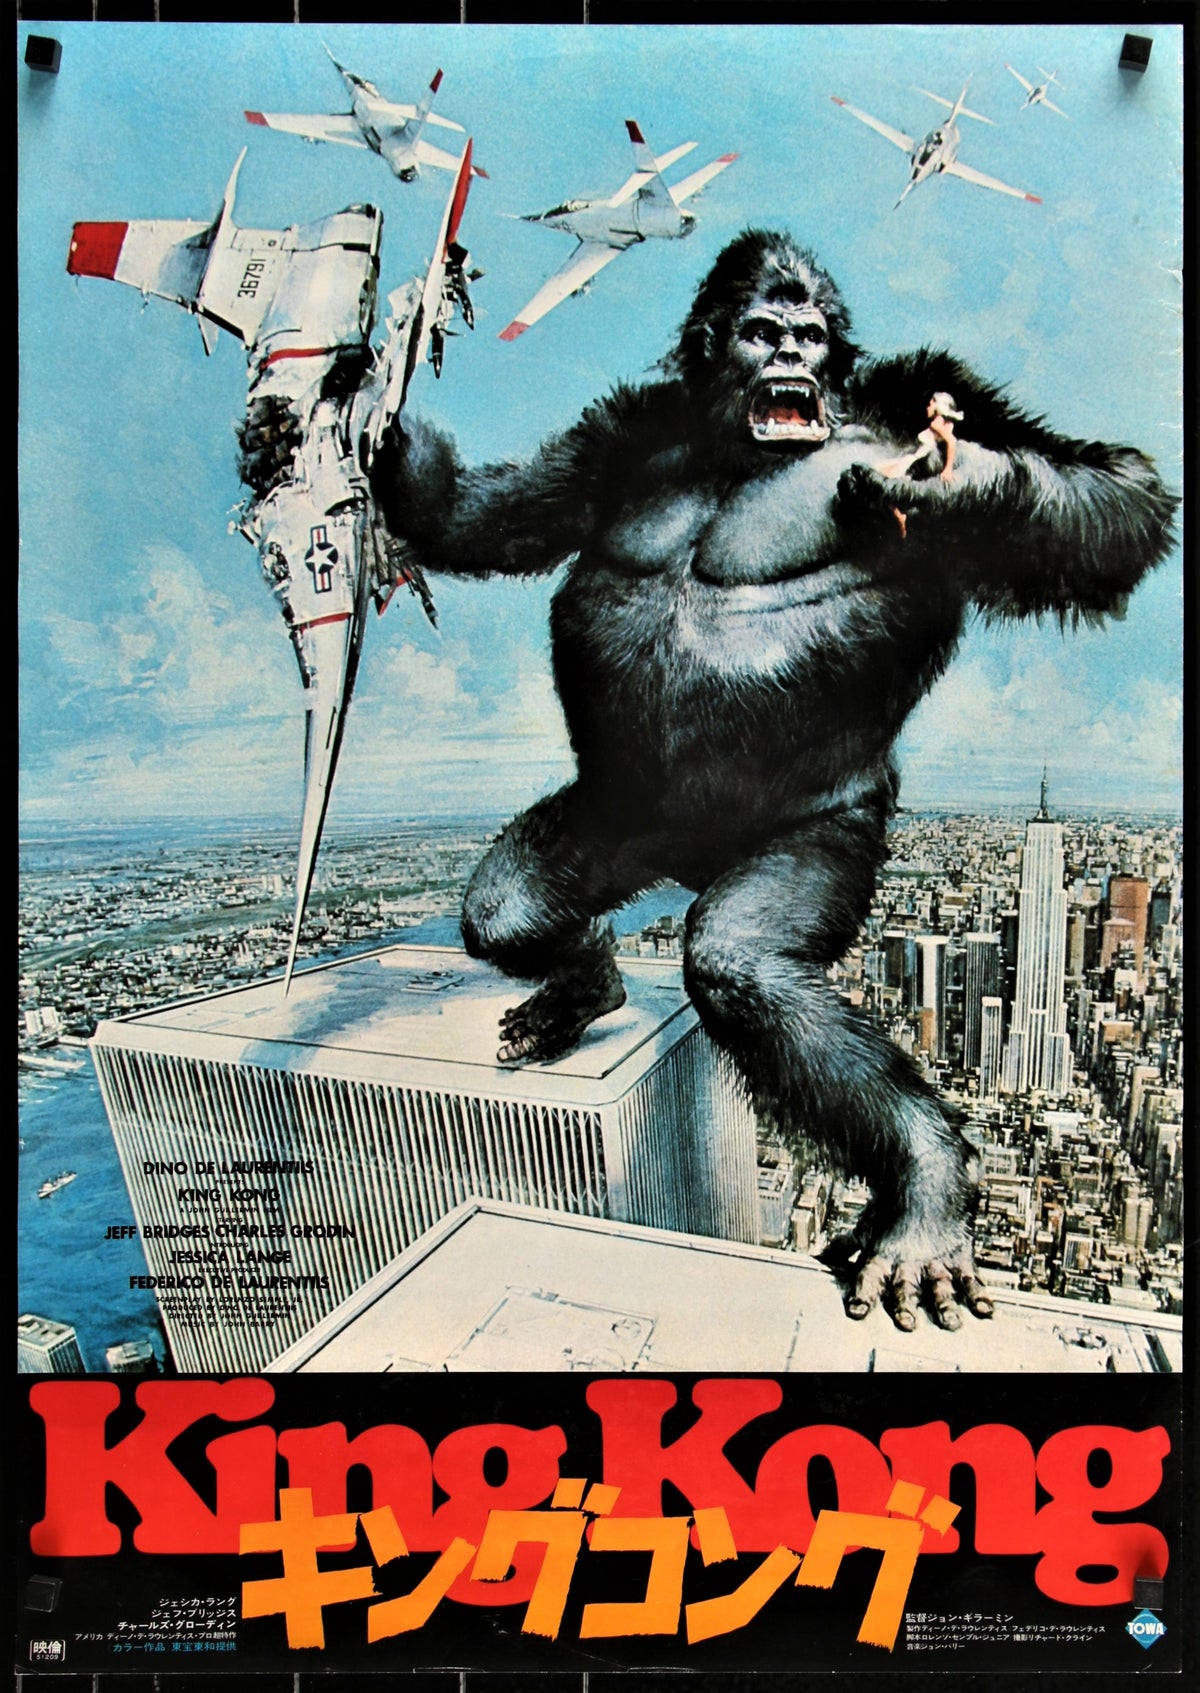 King Kong- Japanese Release - Authentic Vintage Poster